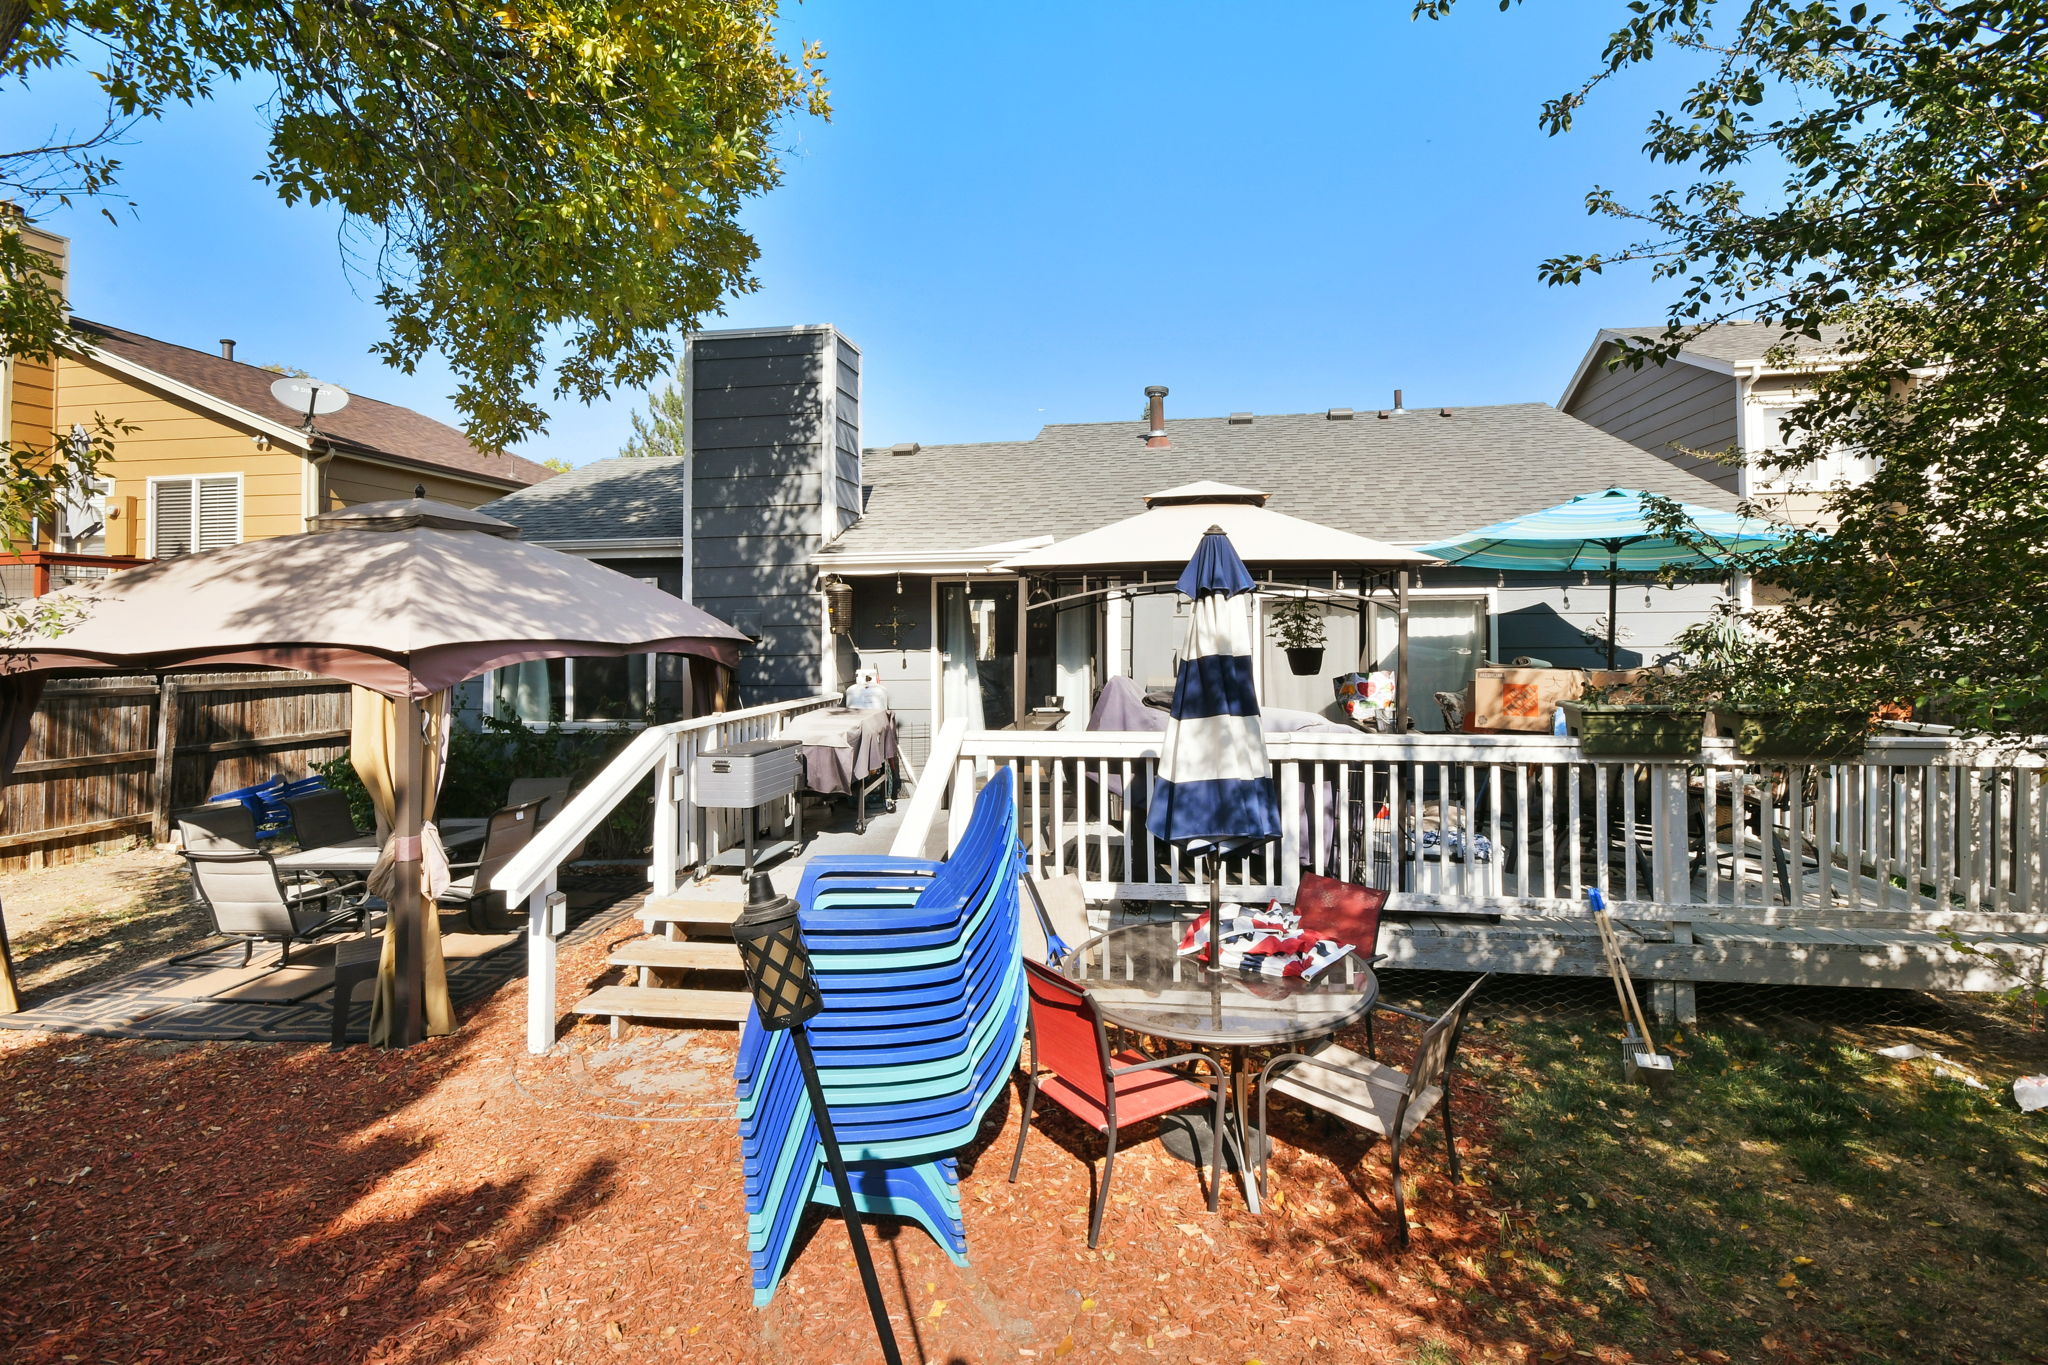  9885 Garland Dr, Westminster, CO 80021, US Photo 22